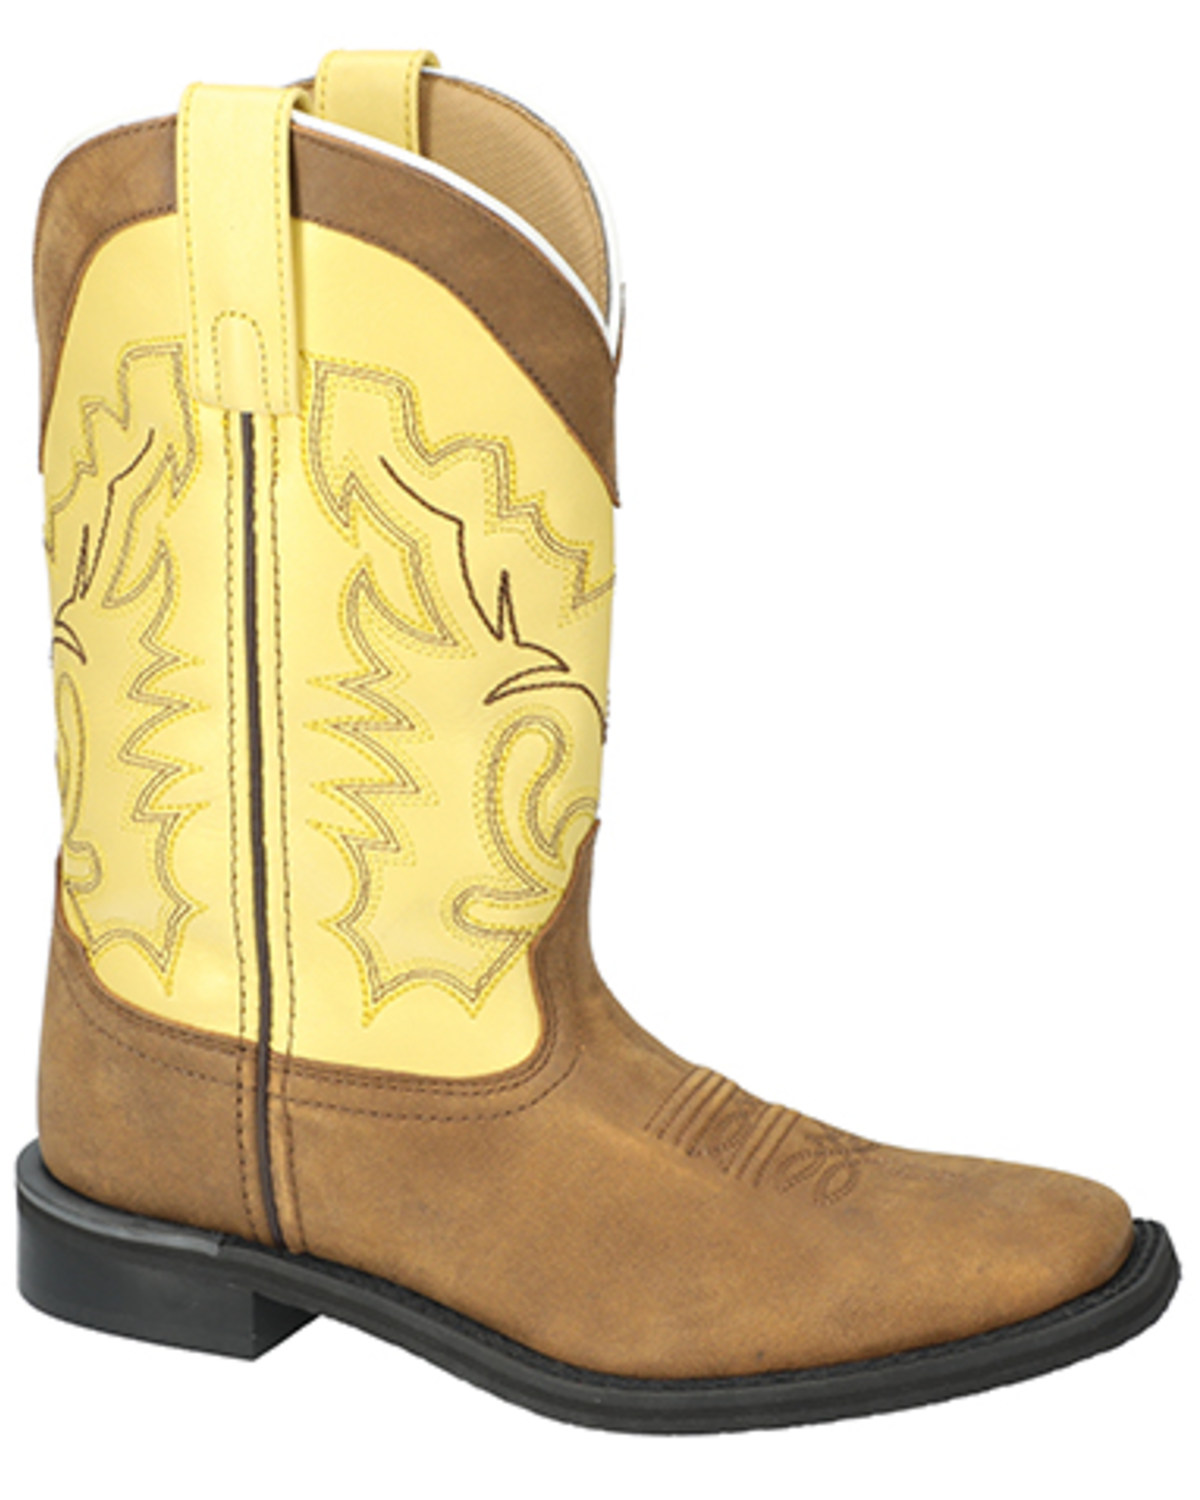 Smoky Mountain Women's Yellow Rose Western Boots - Broad Square Toe